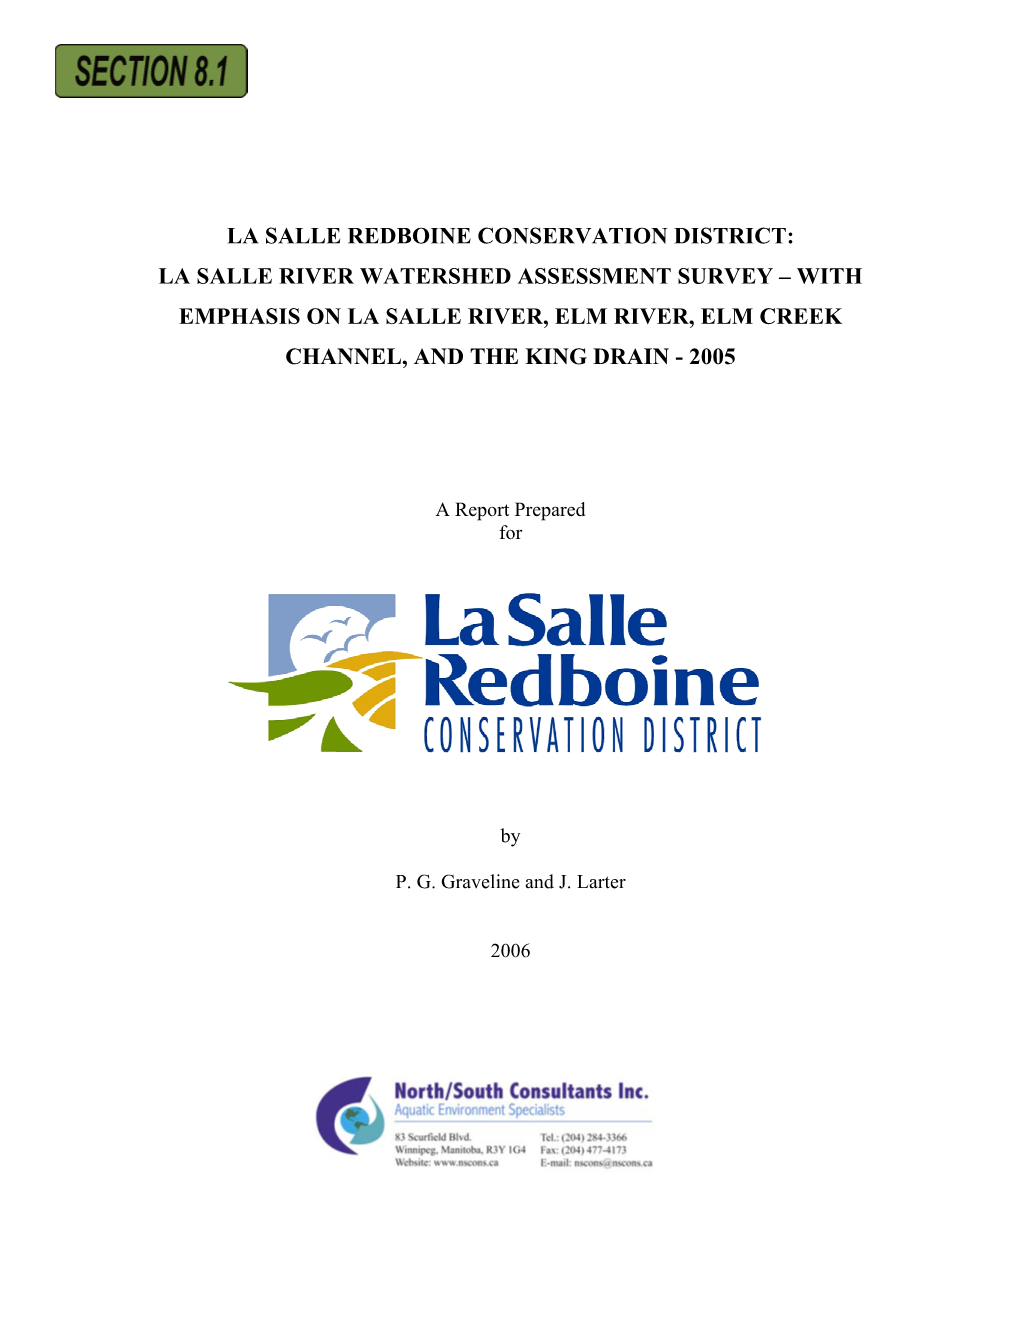 La Salle River Watershed Assessment Survey – with Emphasis on La Salle River, Elm River, Elm Creek Channel, and the King Drain - 2005